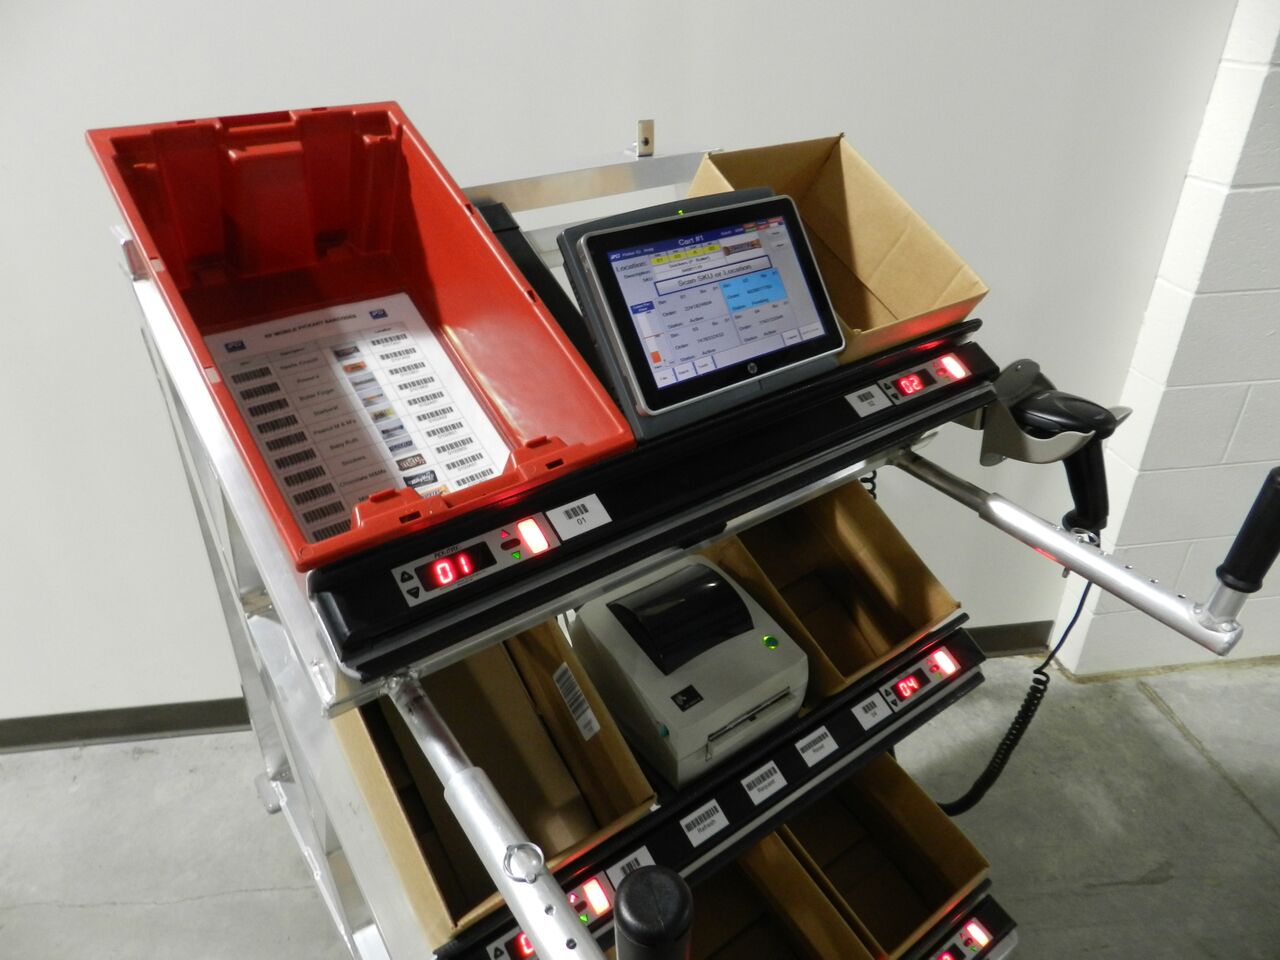 Mobile Picking Carts That Support Simultaneous Wave, Batch Picking of Multiple Orders at ProMat 2015